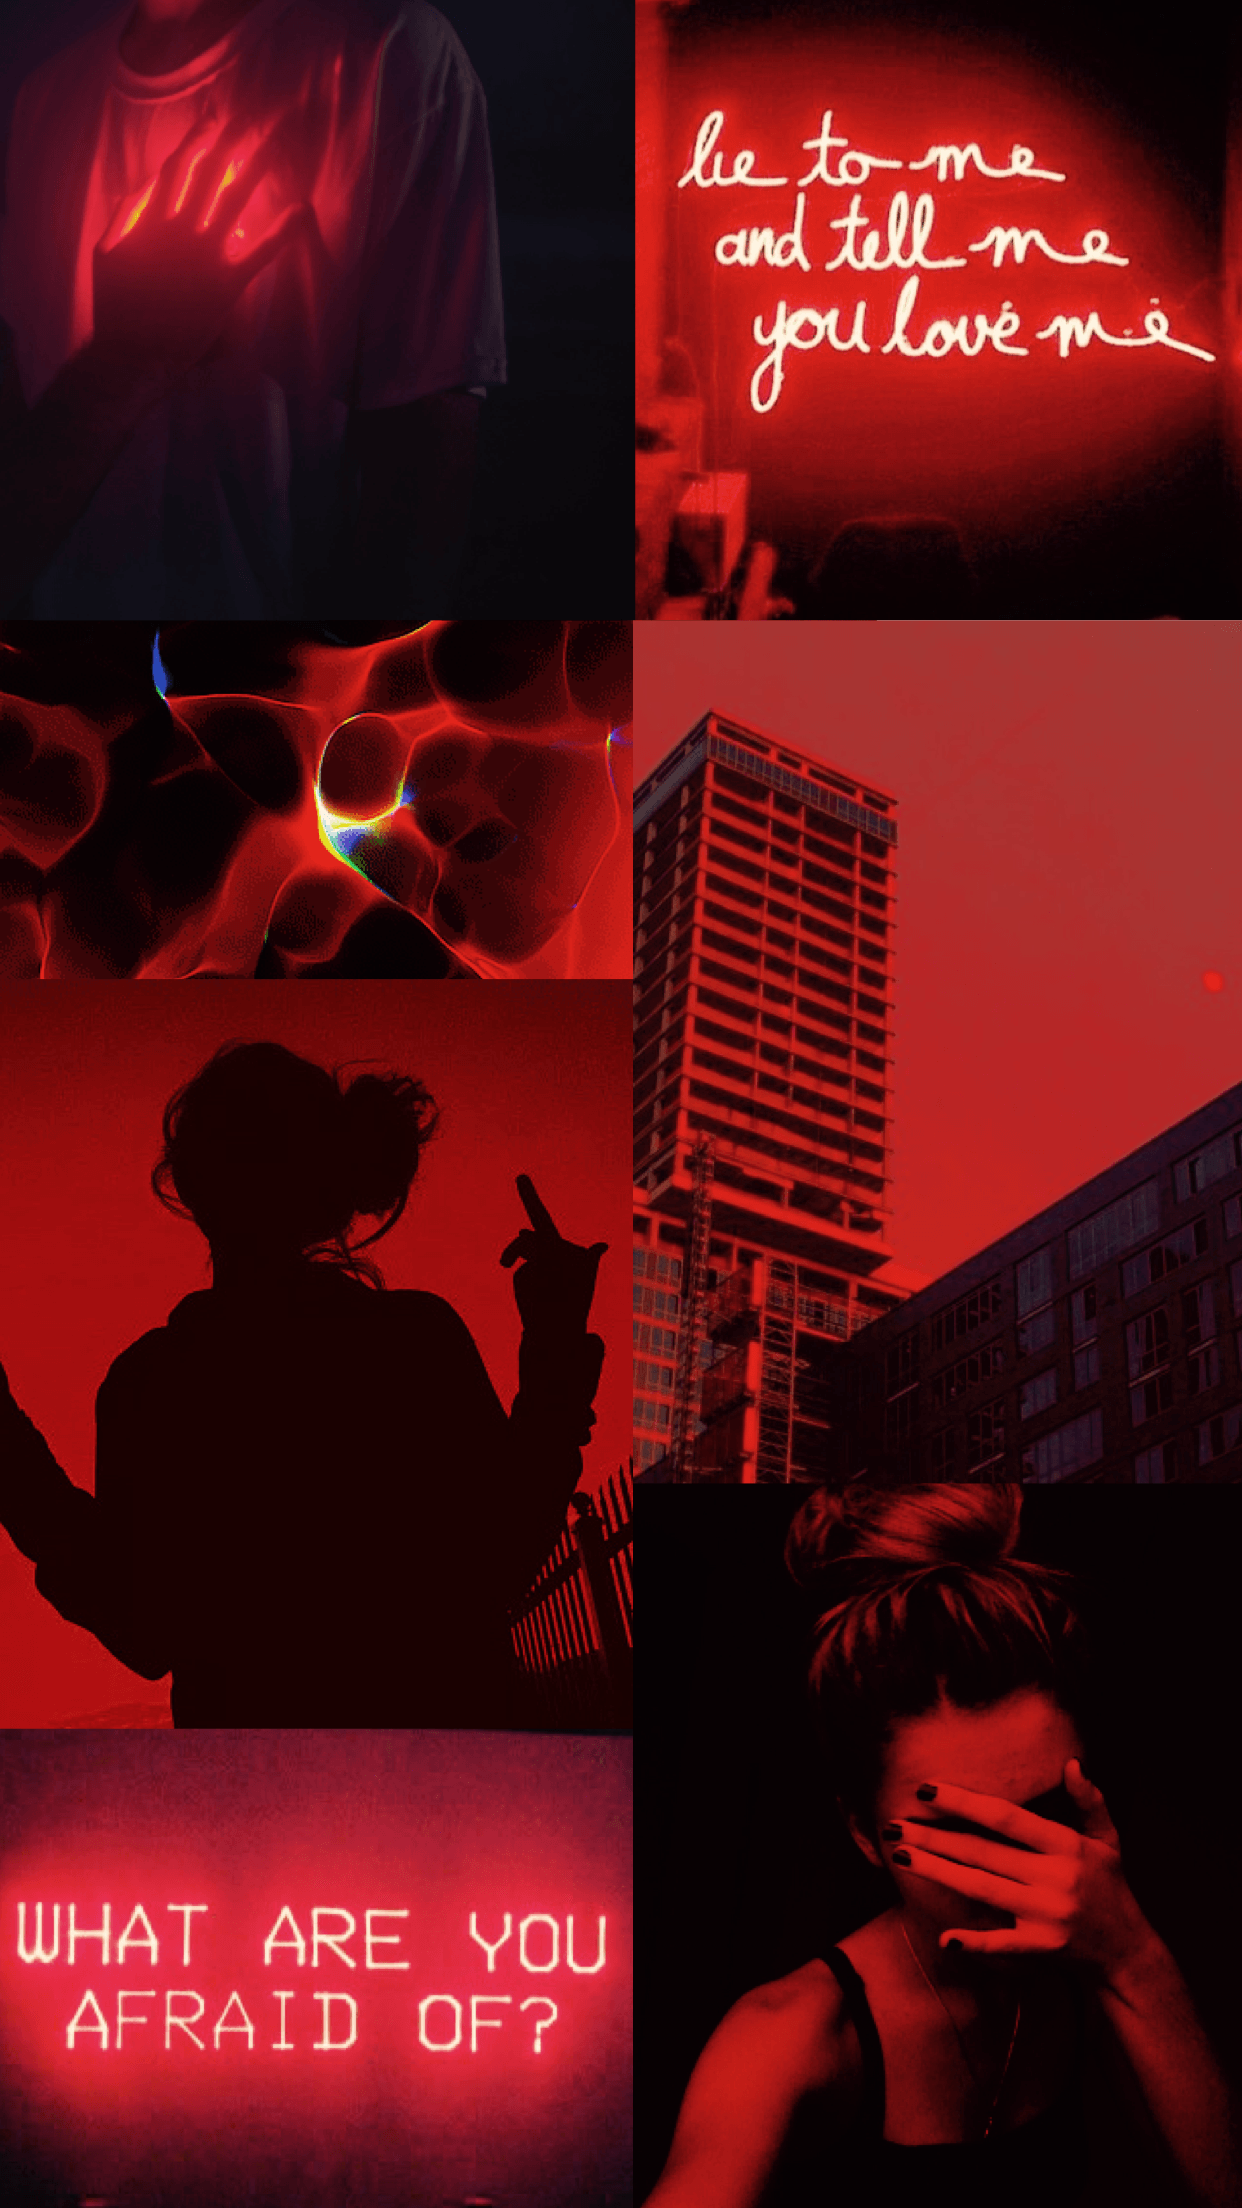 Red aesthetic collage with neon signs, buildings, and a girl with her hands on her mouth. - IPhone red, red